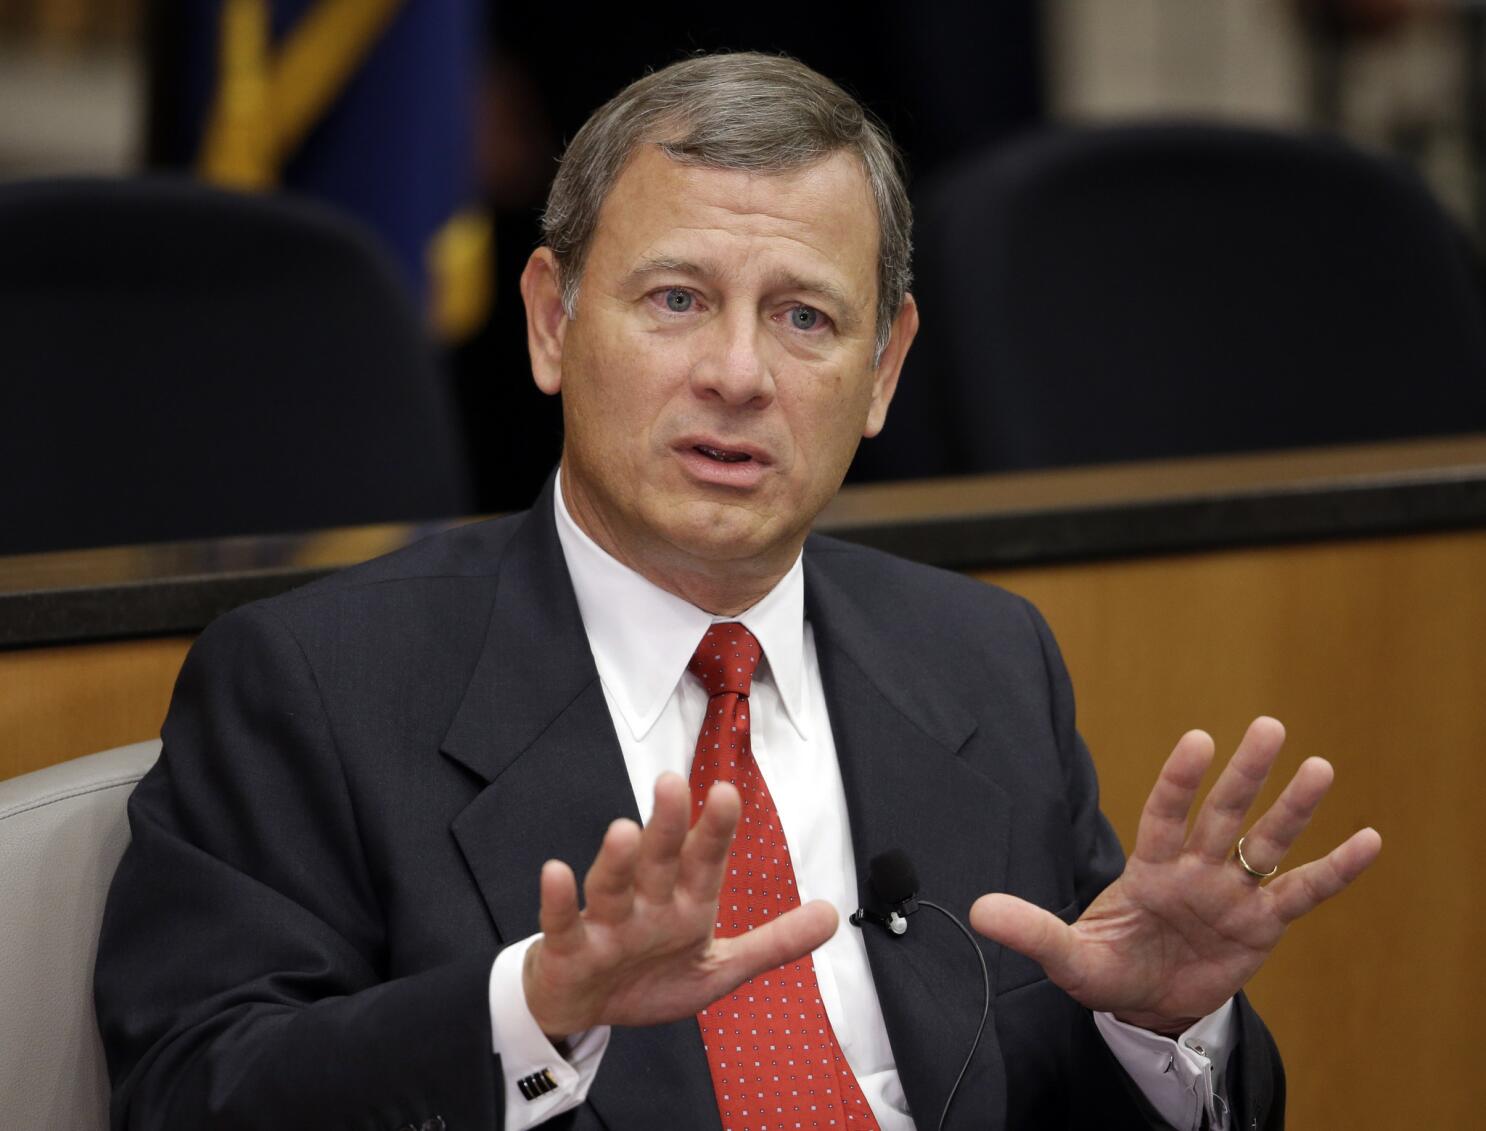 Chief Justice Roberts recently spent a night in a hospital - The Columbian